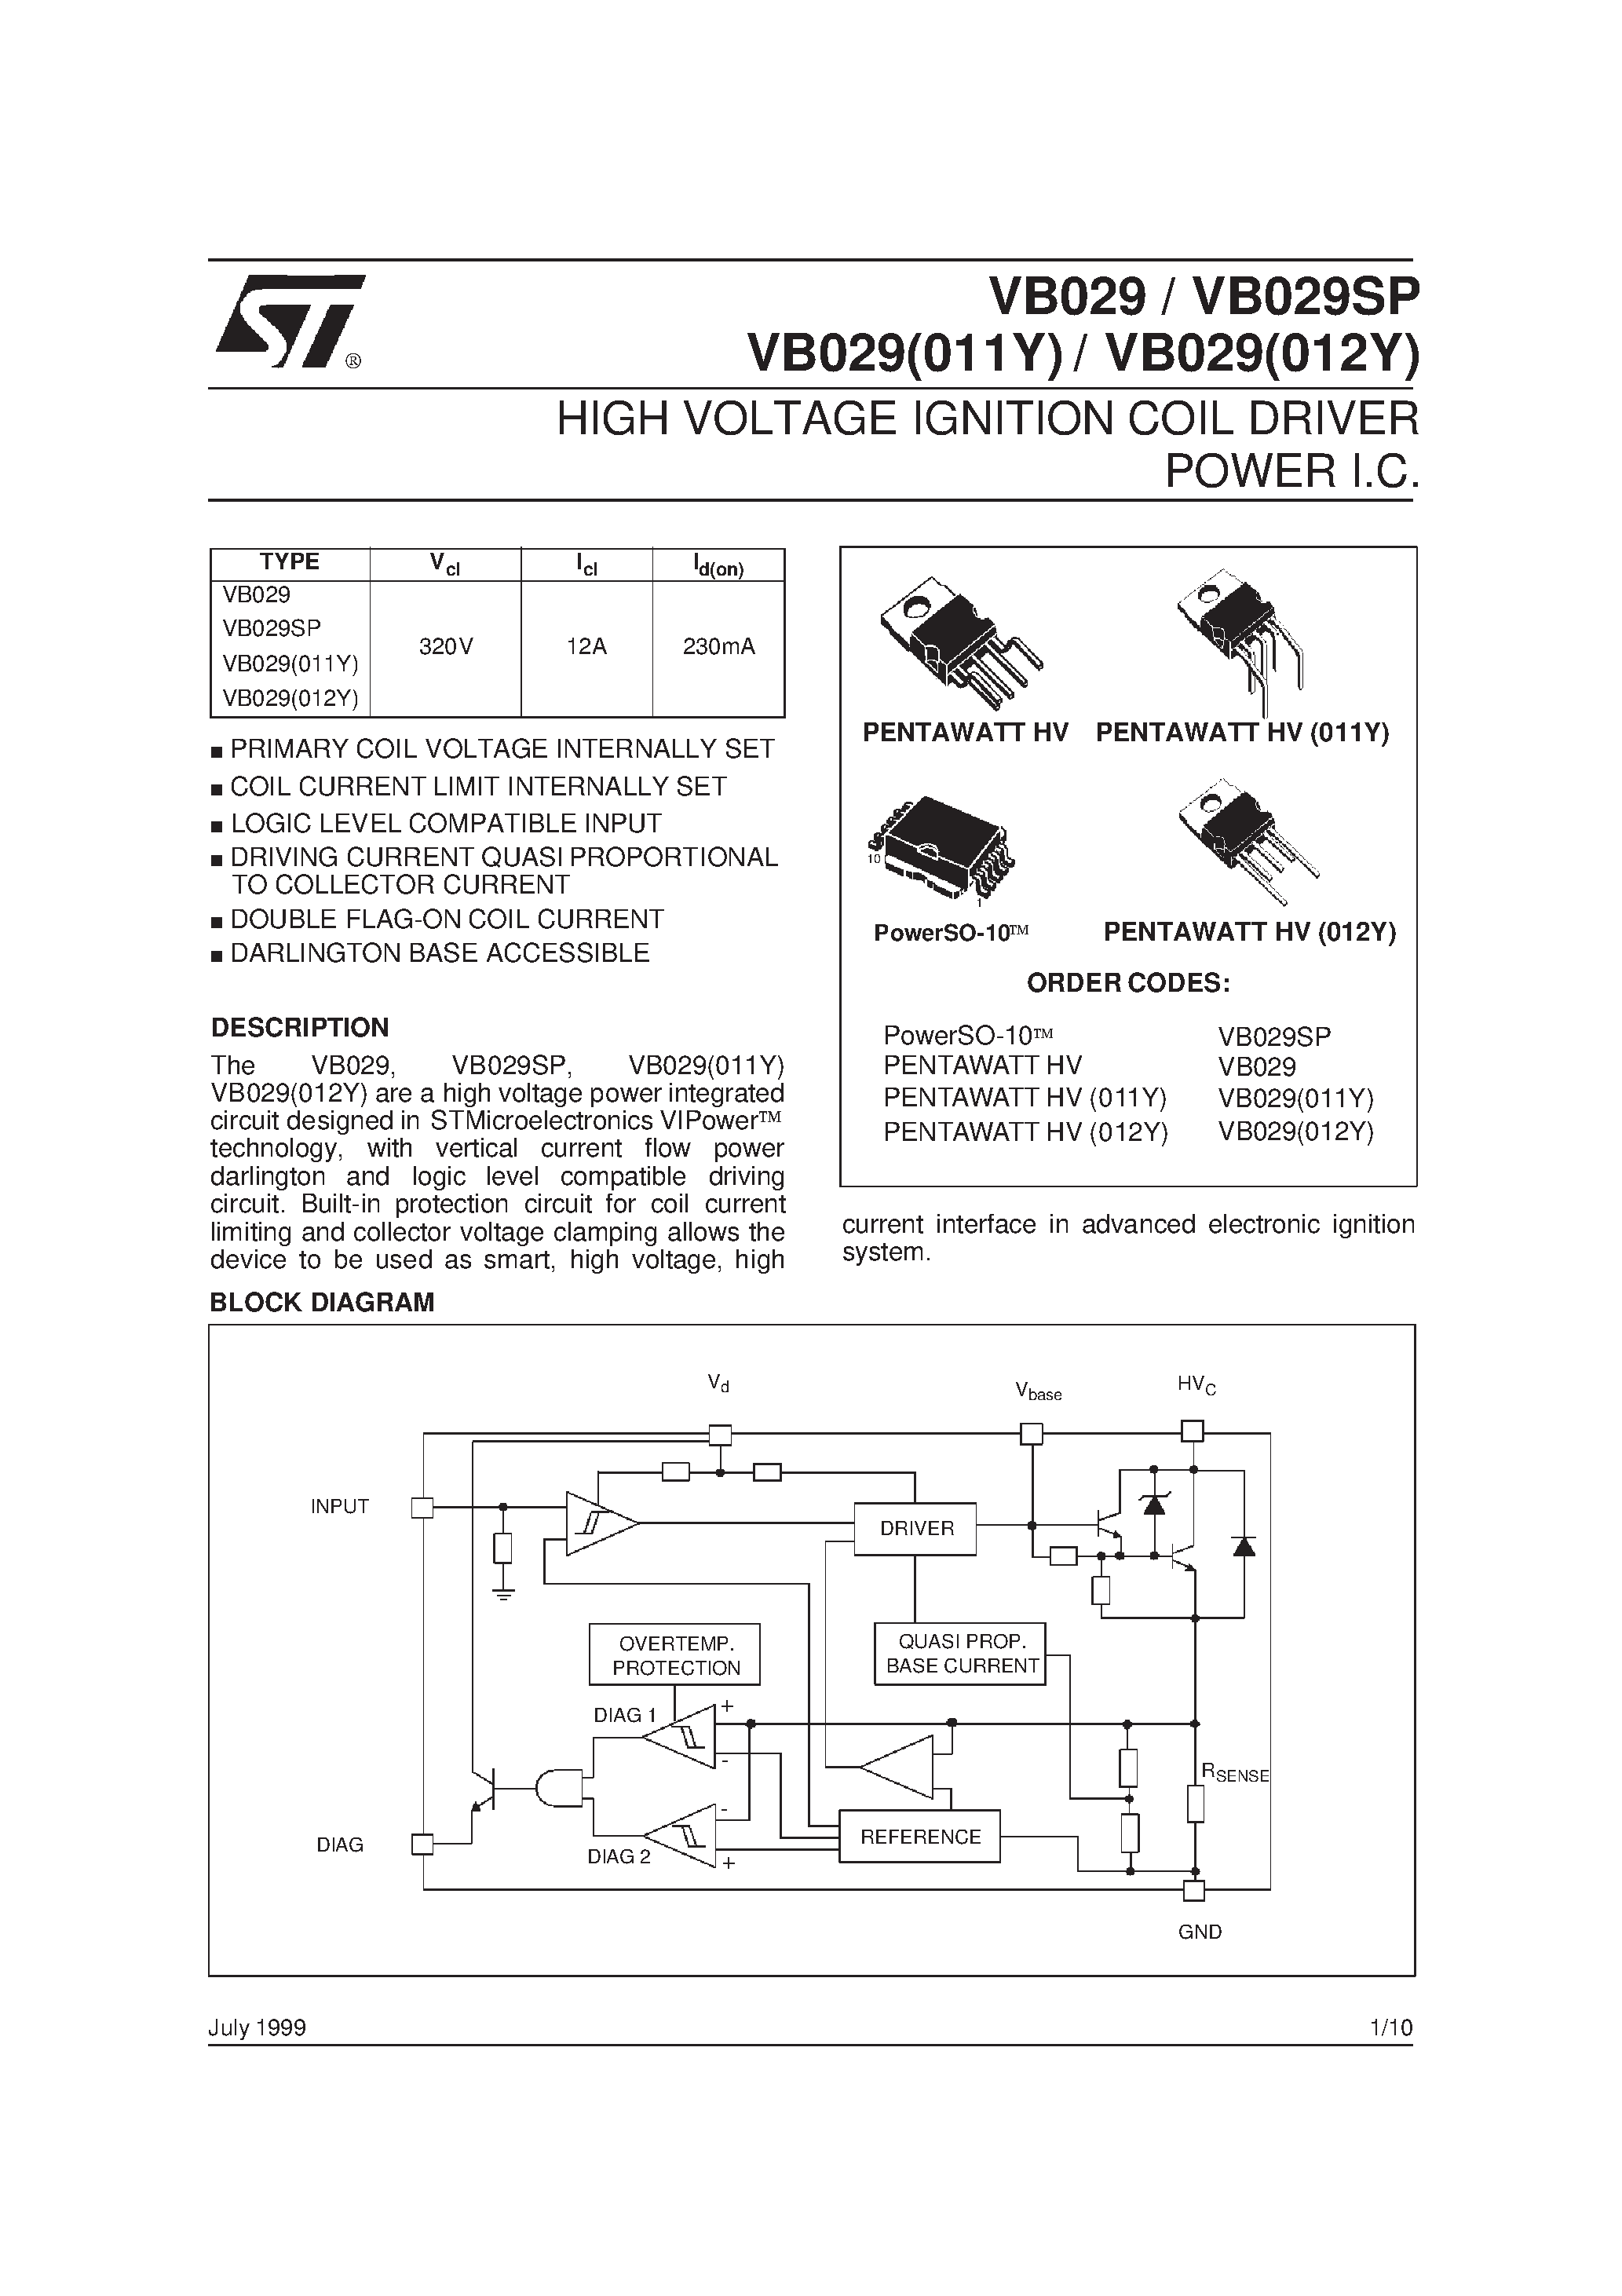 Datasheet VB029(011Y) - HIGH VOLTAGE IGNITION COIL DRIVER POWER I.C. page 1